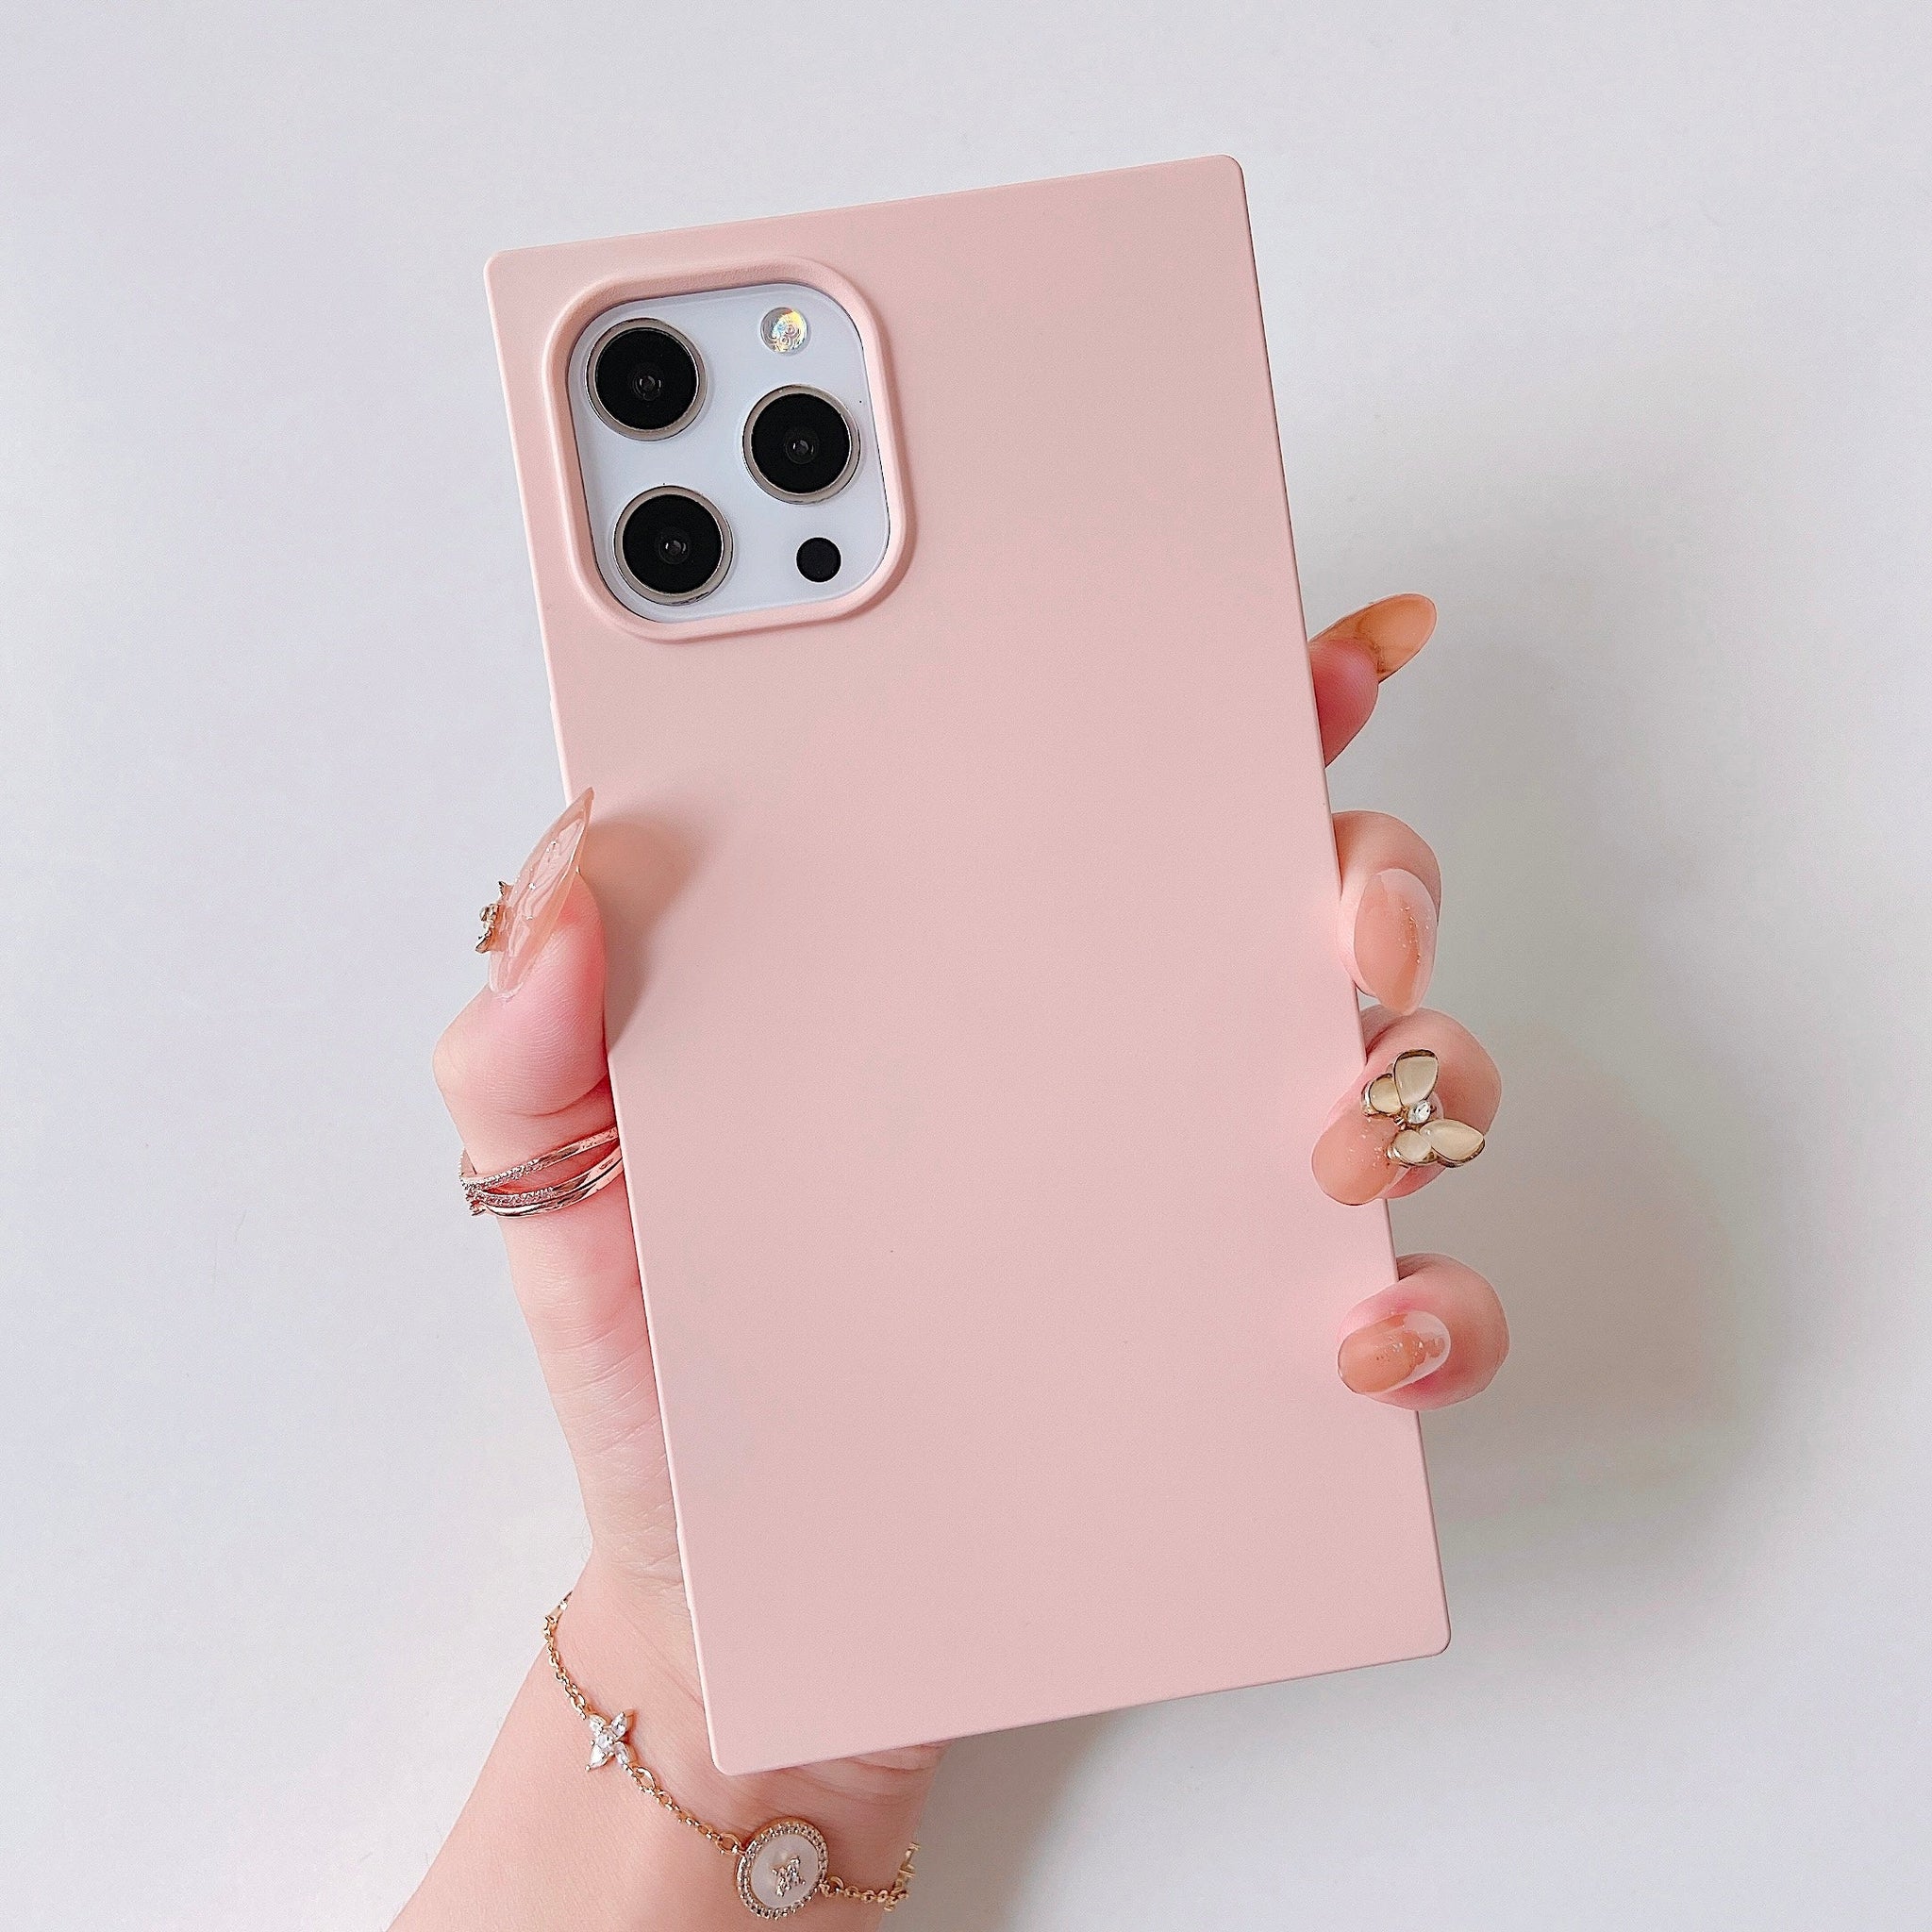 iPhone 11 Pro Max Case Square Silicone (Chalk Pink)